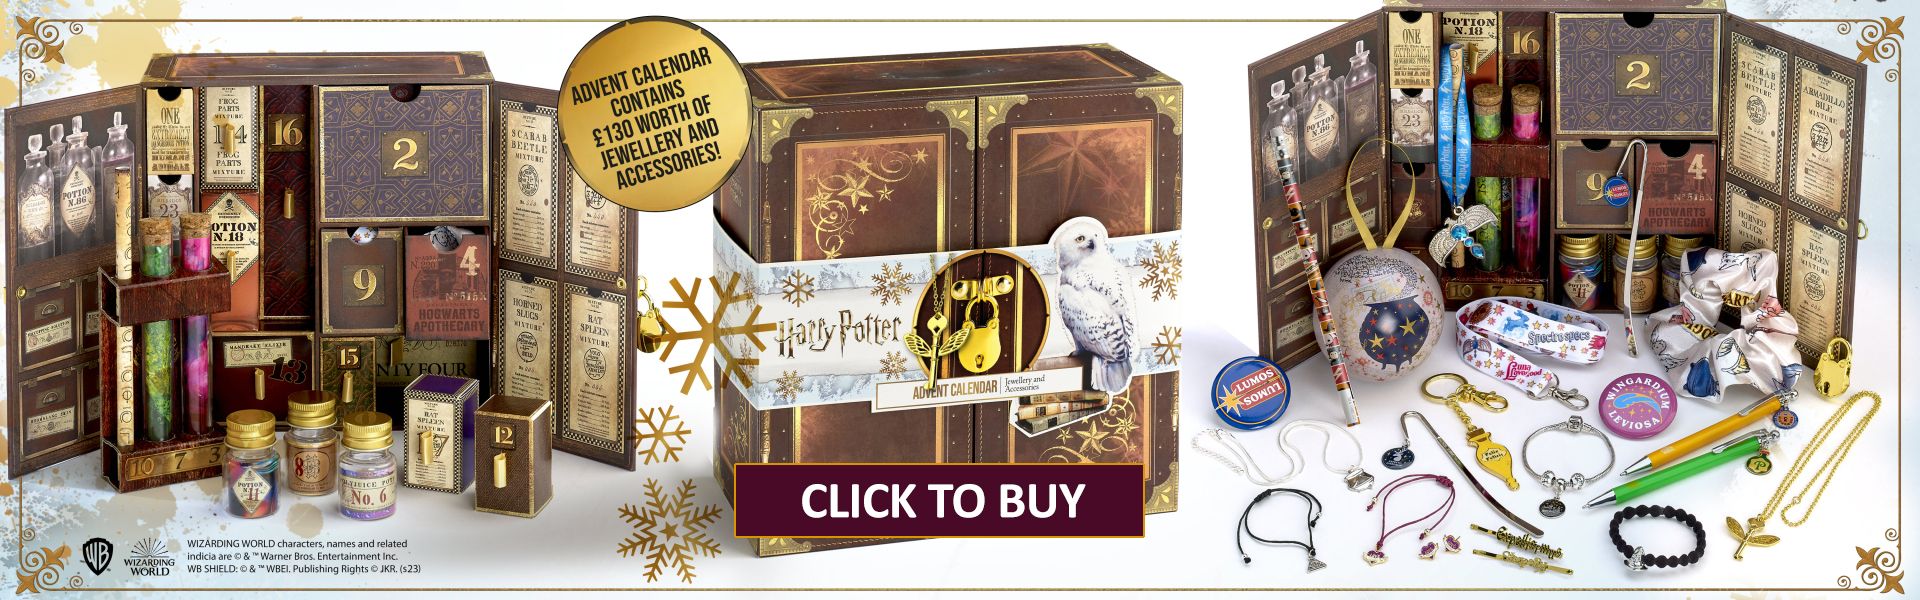 Harry Potter Jewellery, Necklaces & Charms The Carat Shop